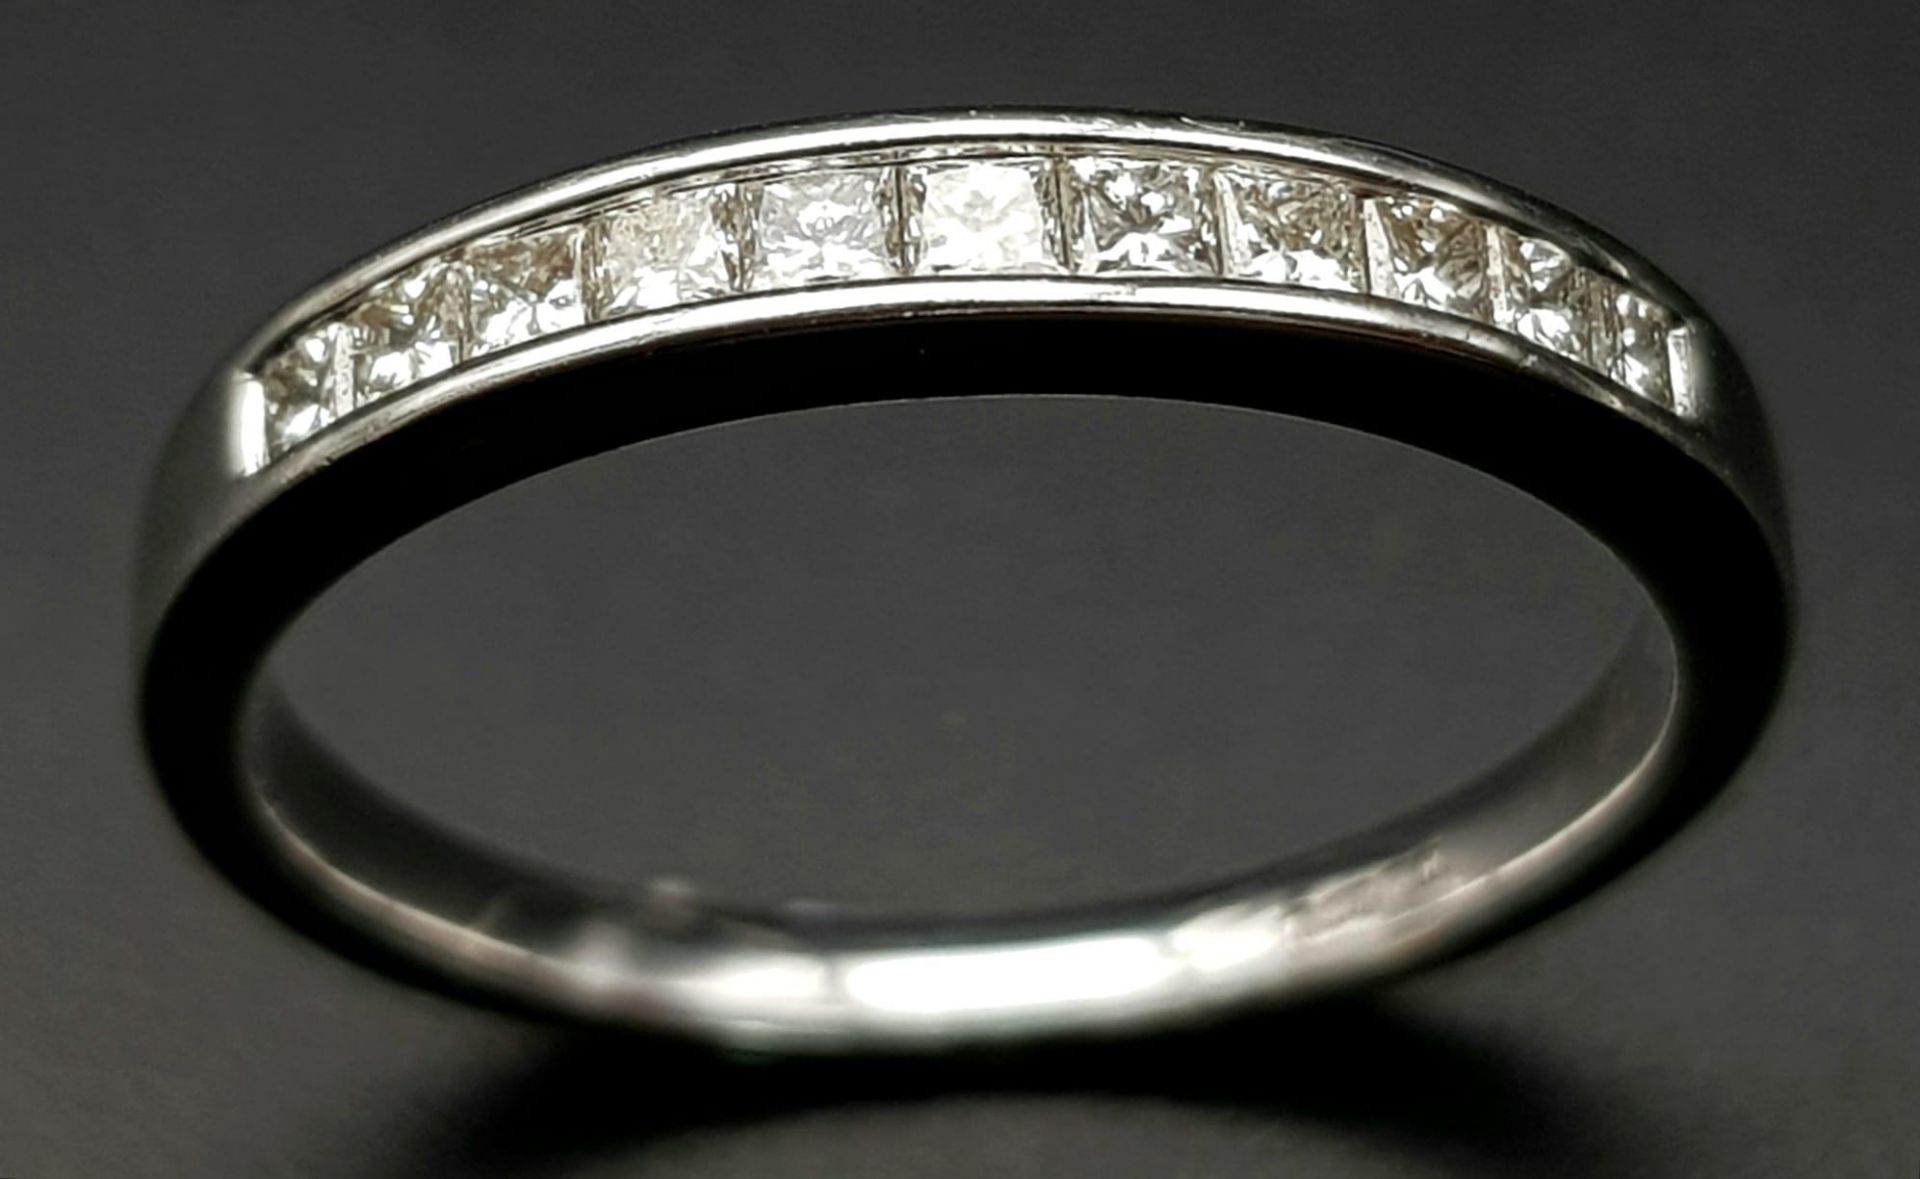 AN 18K WHITE GOLD DIAMOND 1/2 ETERNITY RING. CHANNEL SET PRINCESS CUTS. 0.35CTW. 2.5G. SIZE M - Image 2 of 5